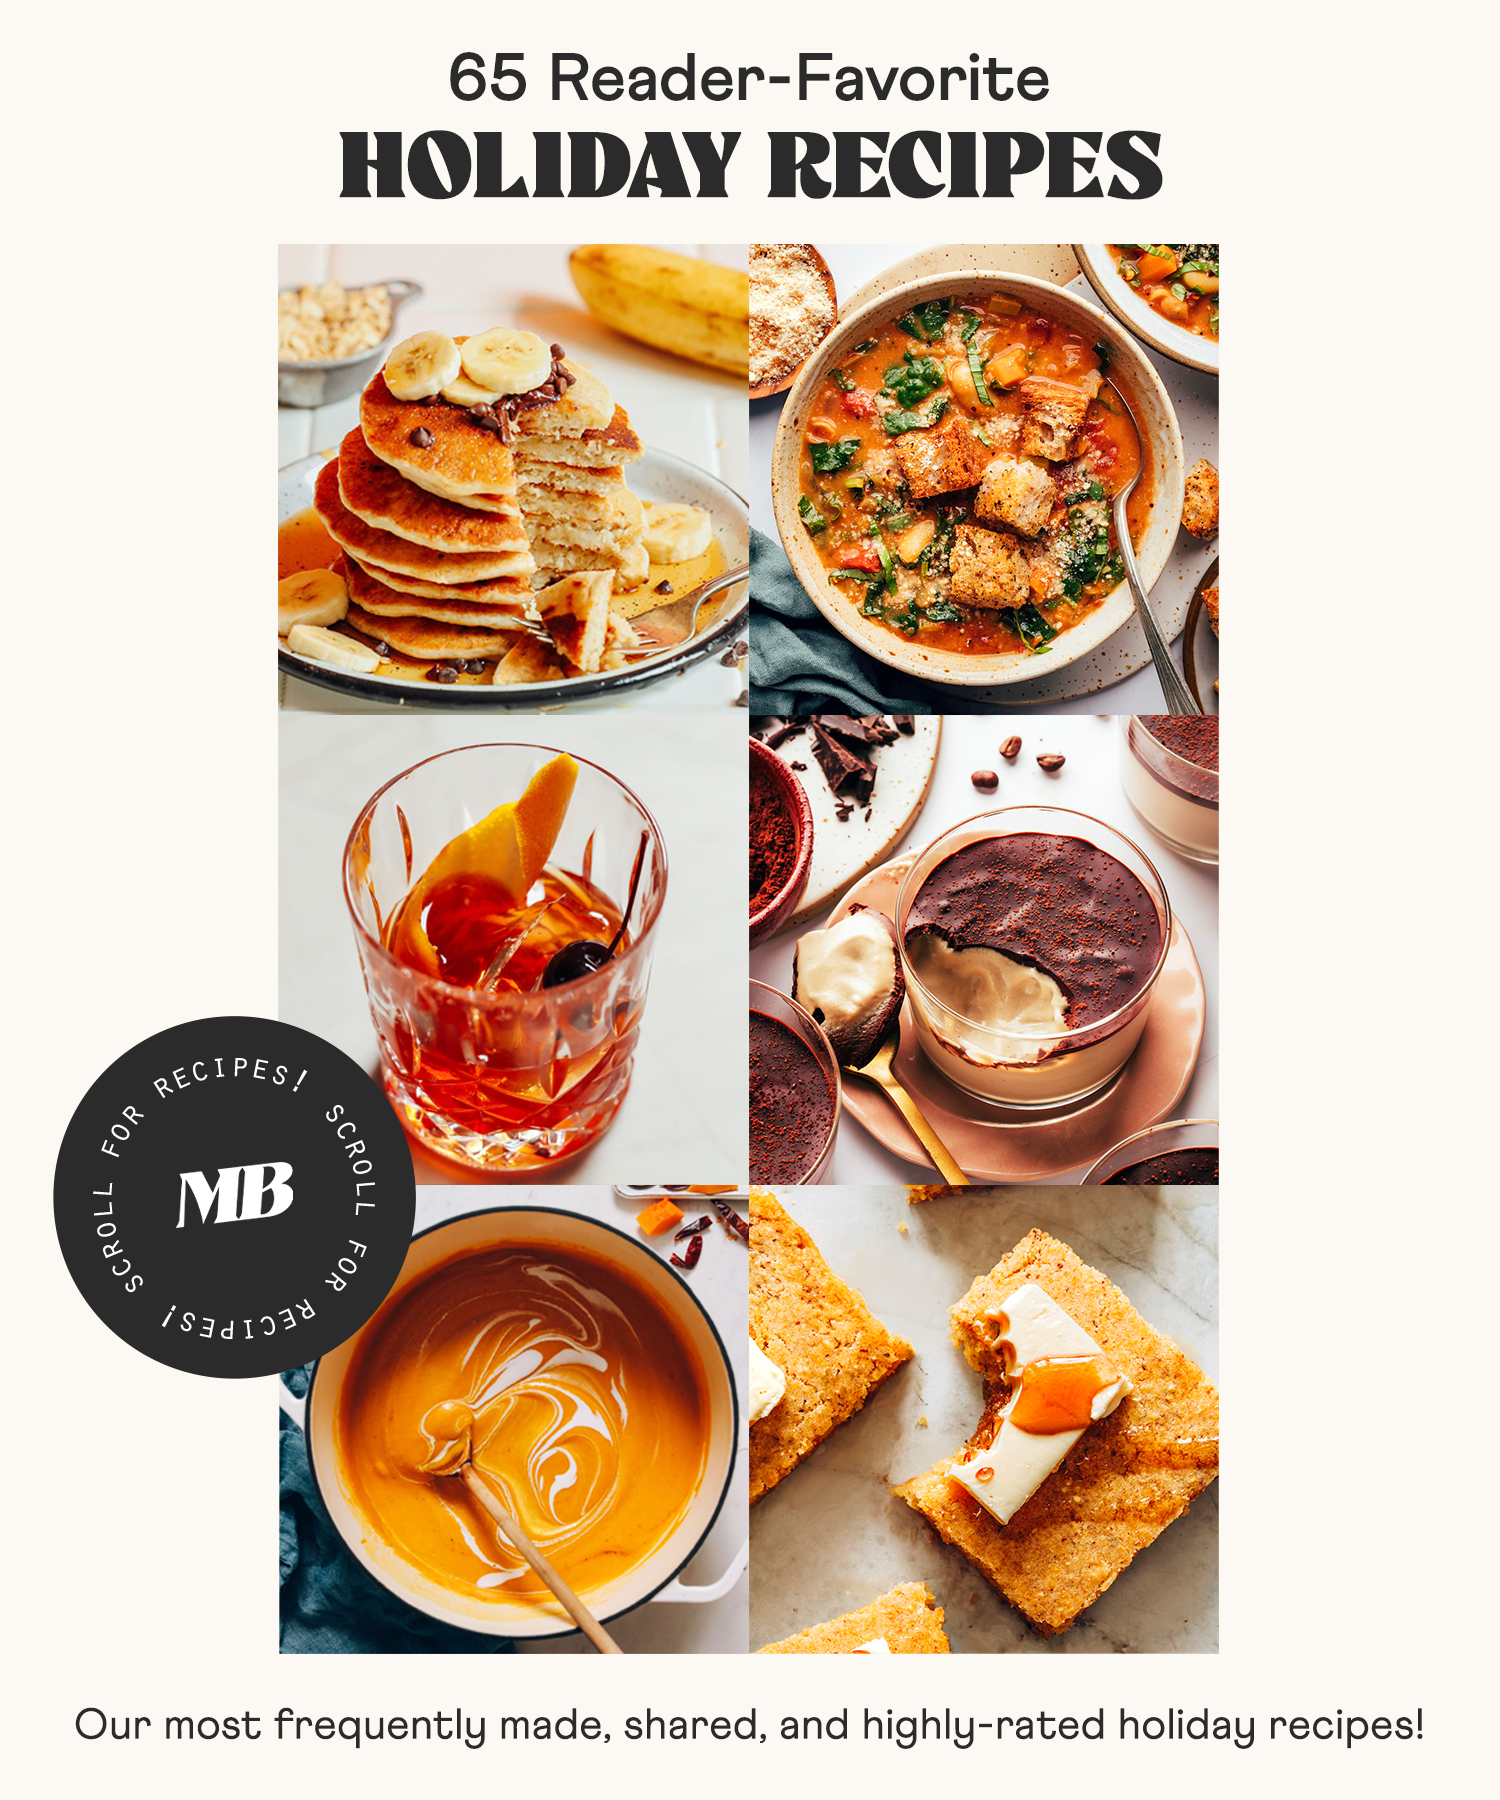 Images of reader-favorite holiday recipes